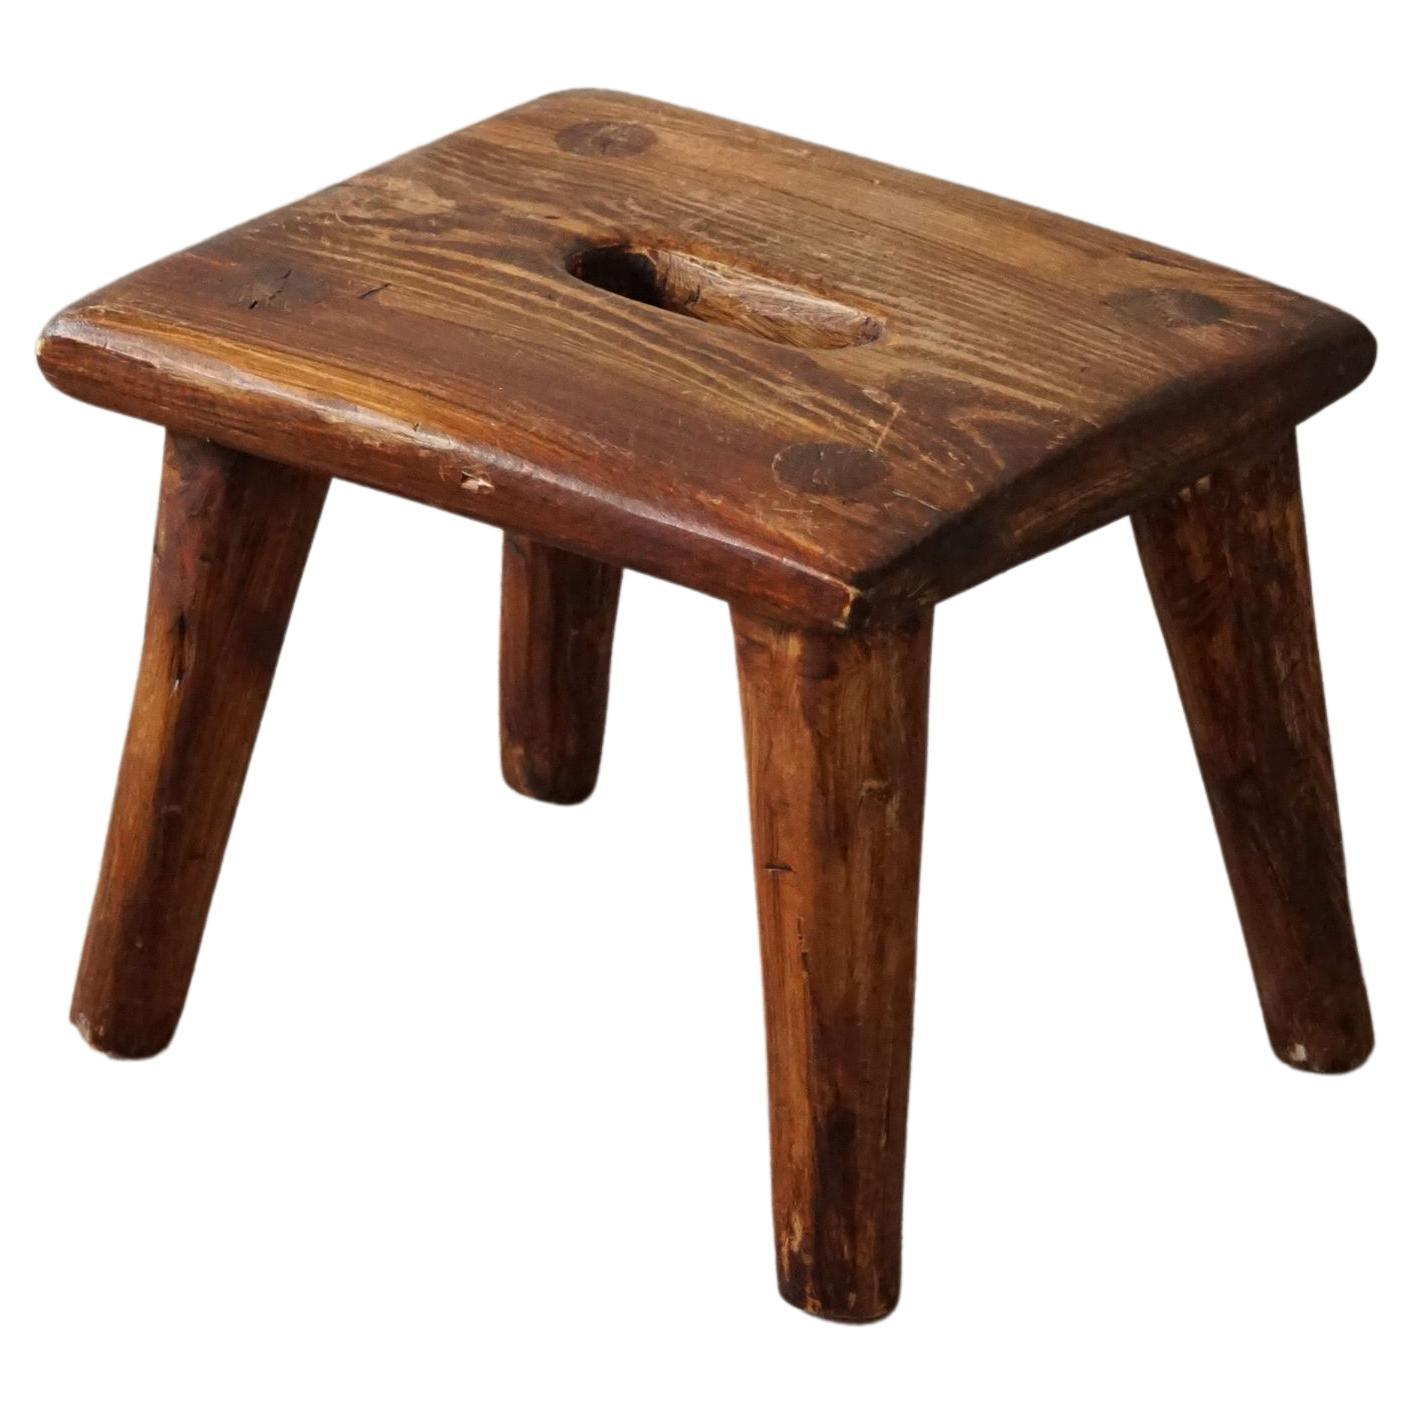 Wabi Sabi Stool in Solid Pine, Handcrafted by a Danish Cabinetmaker, 1960s